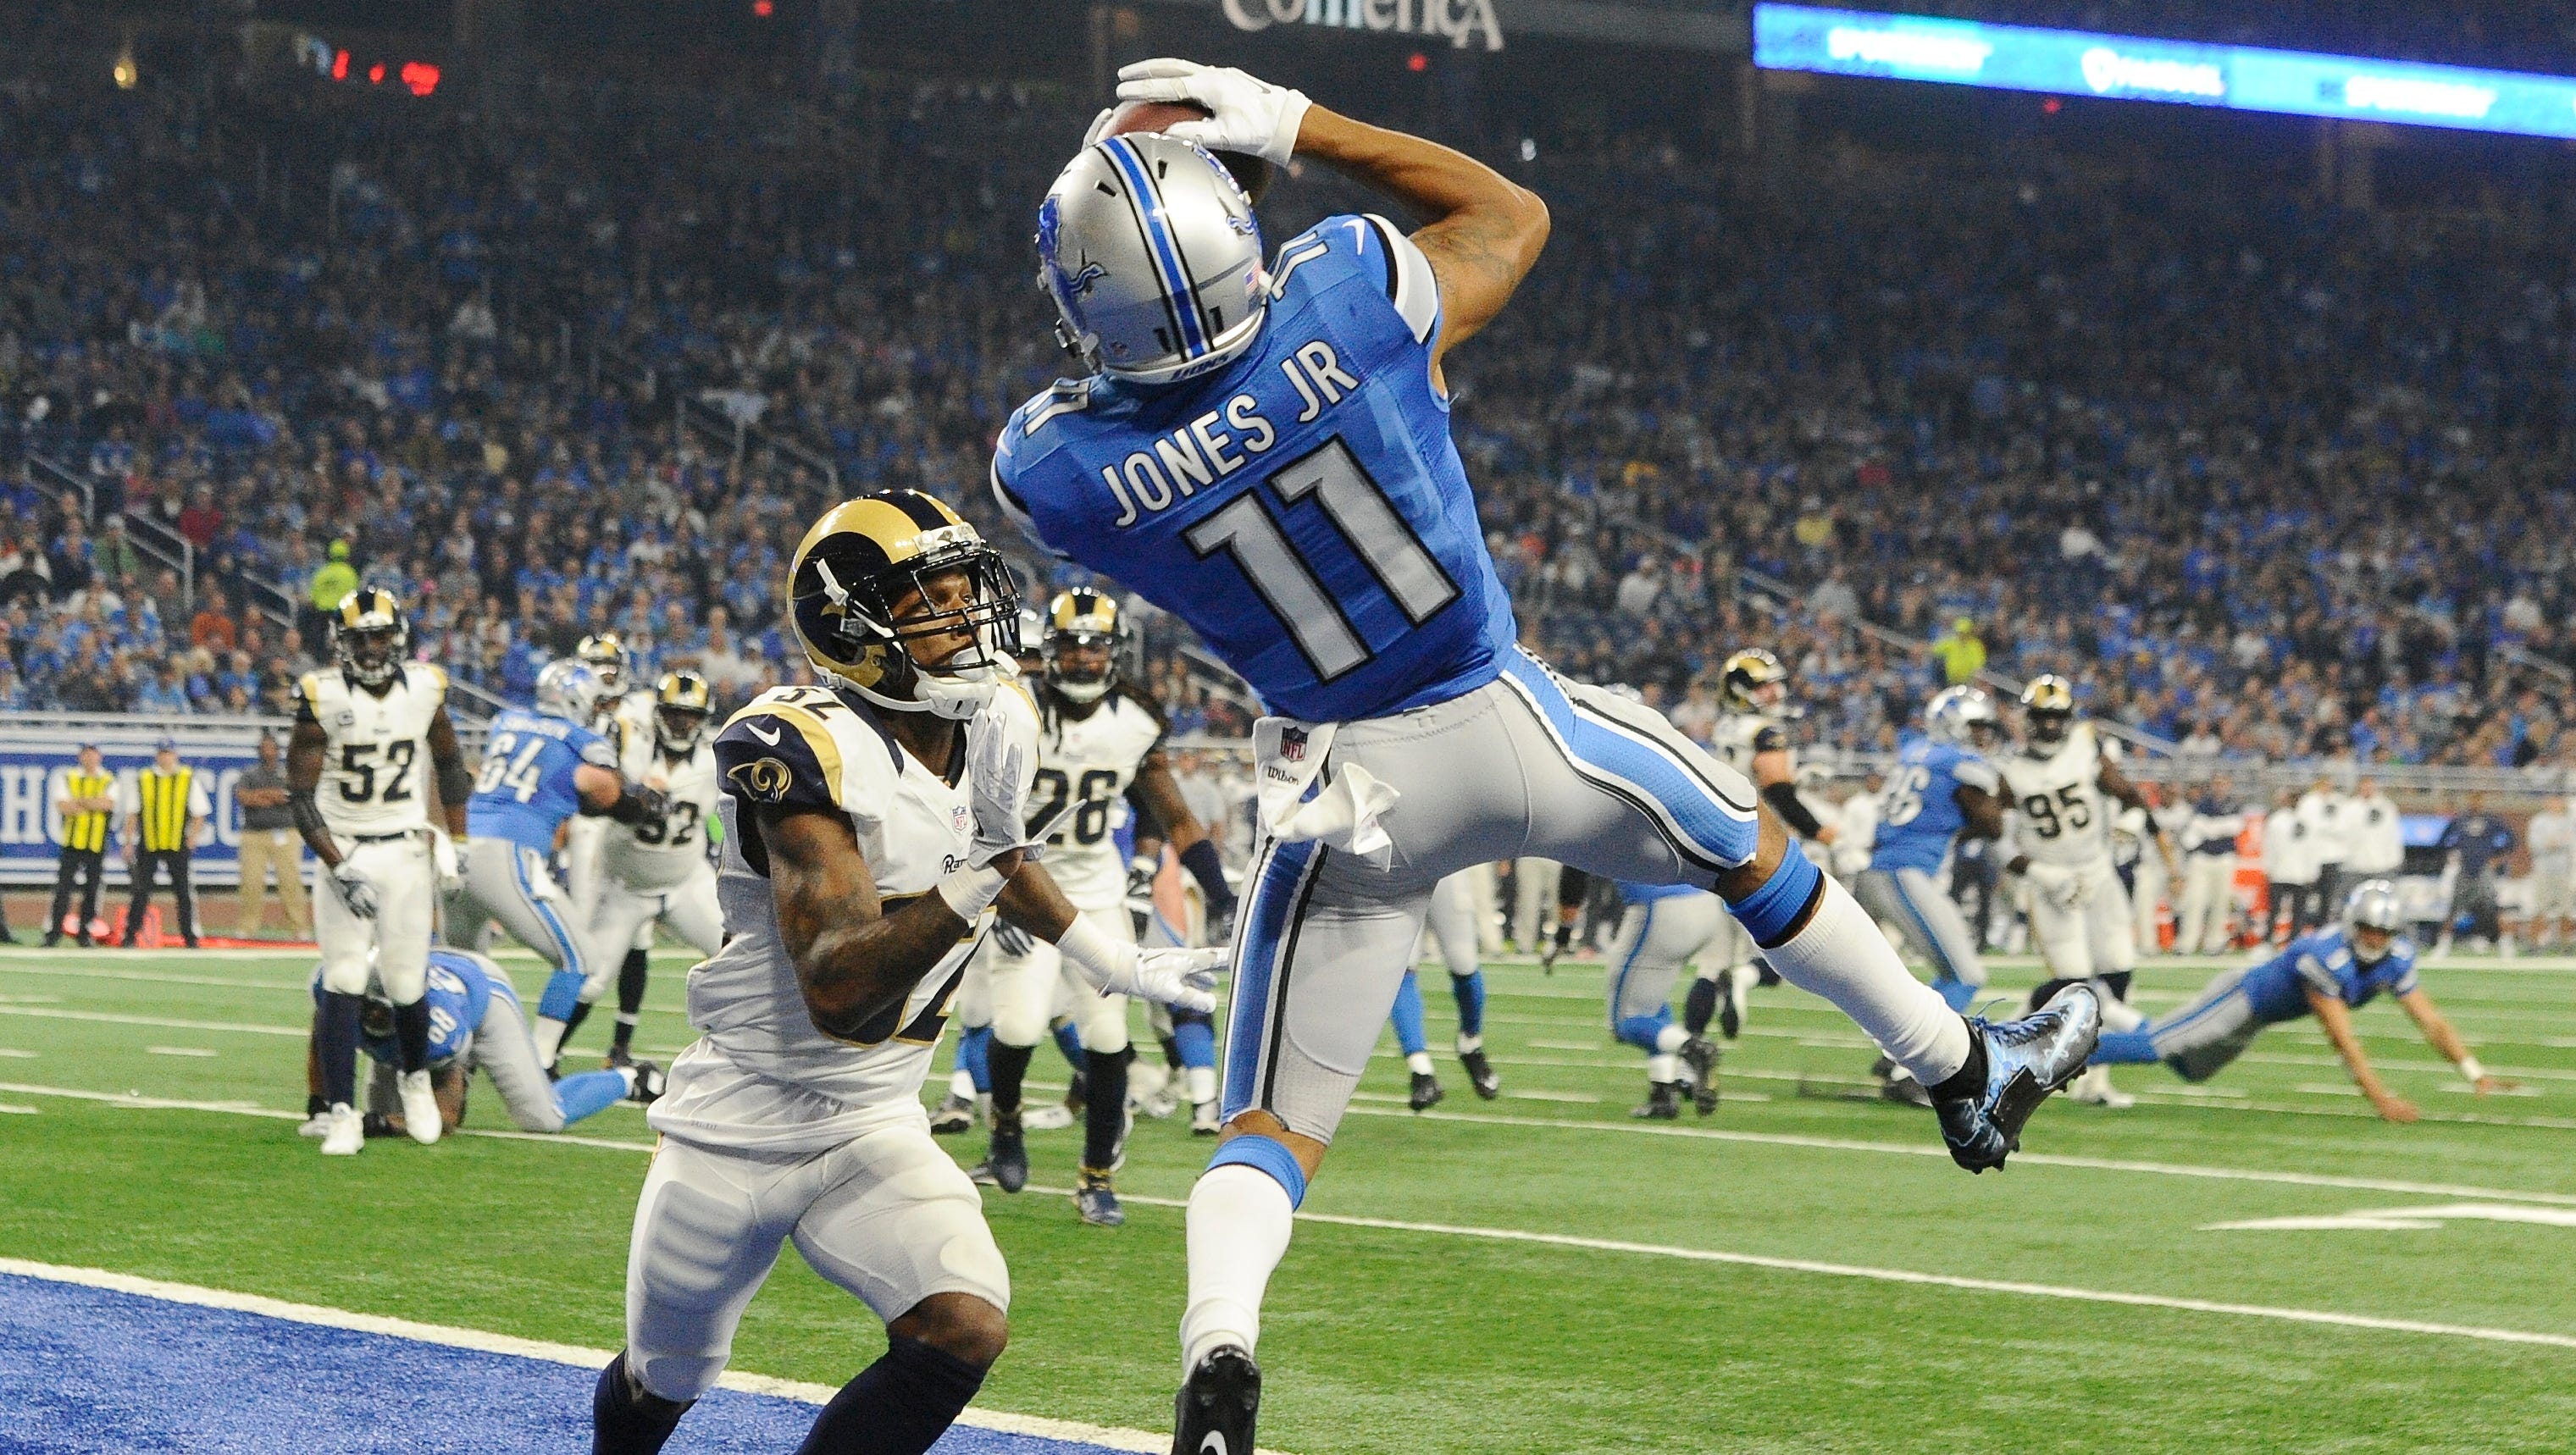 Lions wide receiver Marvin Jones Jr. pulls down a leaping touchdown over the Rams' Troy Hill on Detroit's first offensive drive in the first quarter.